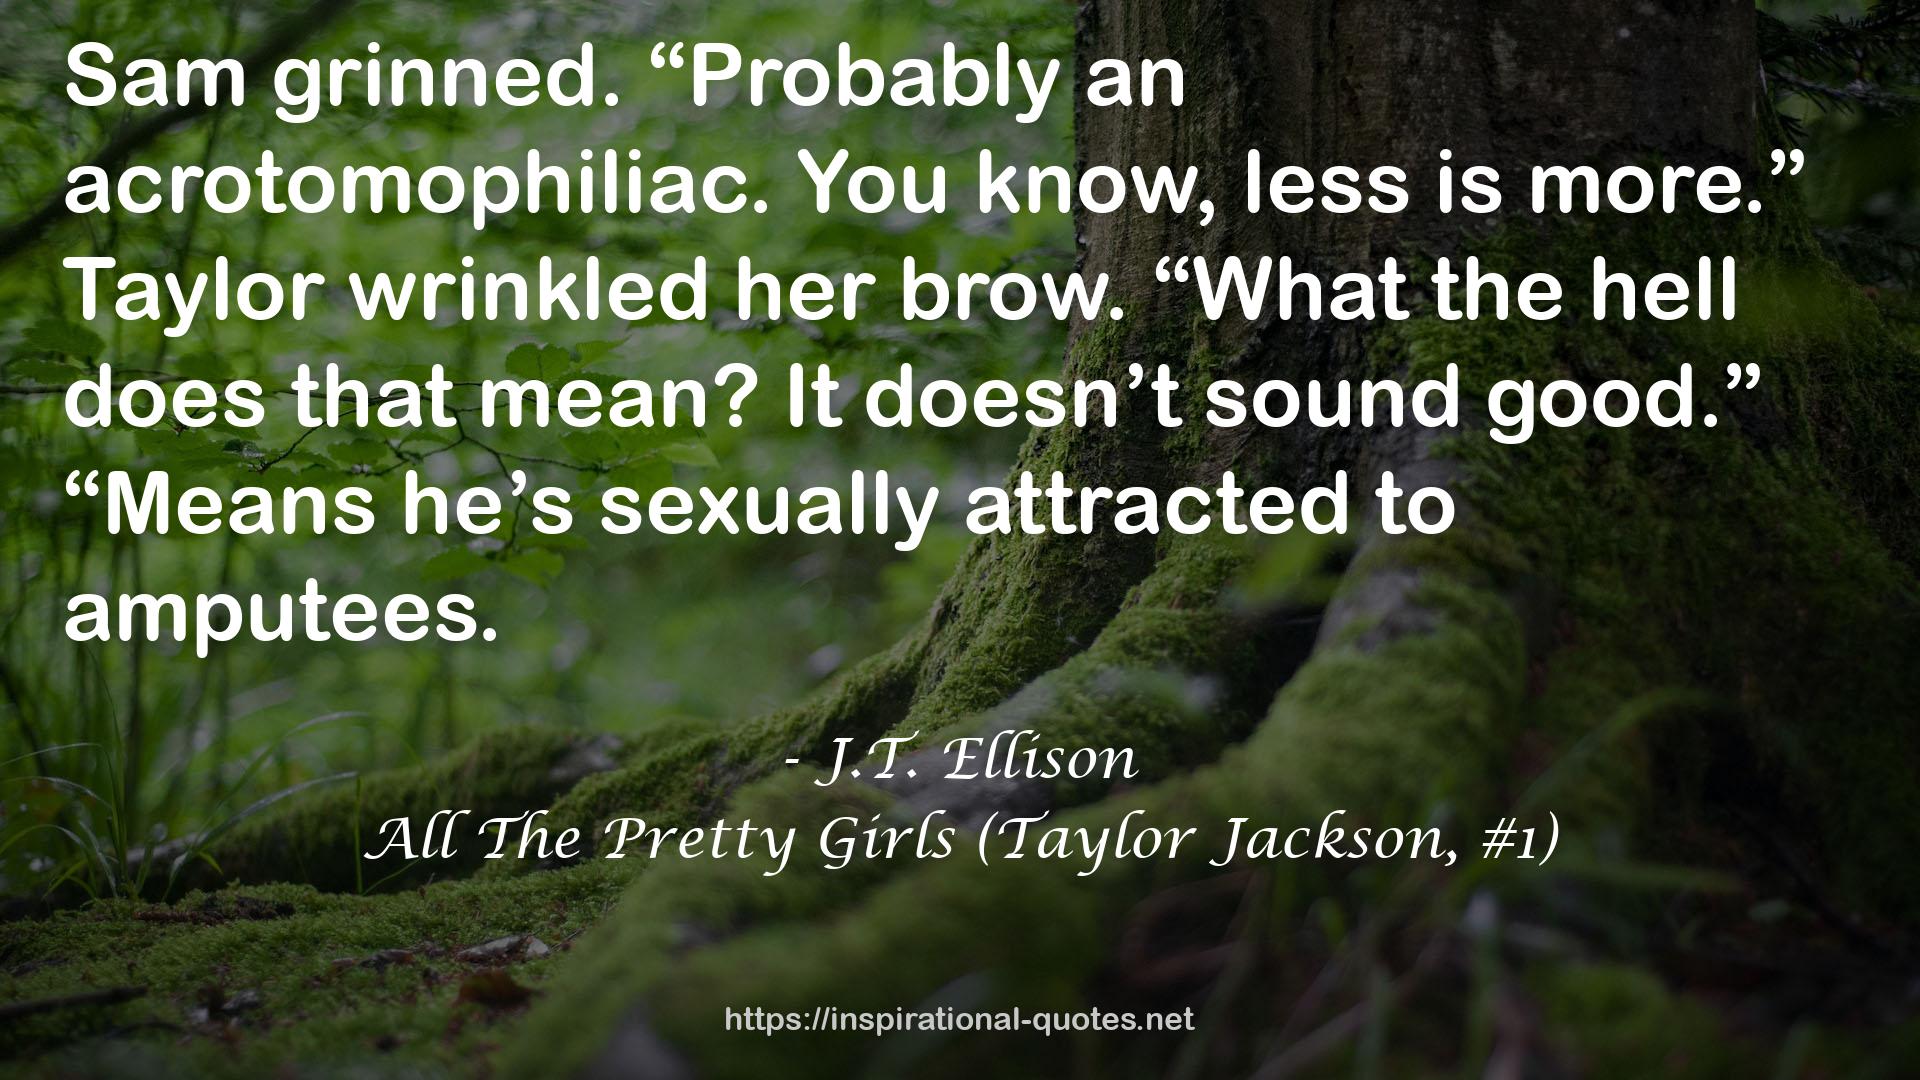 All The Pretty Girls (Taylor Jackson, #1) QUOTES